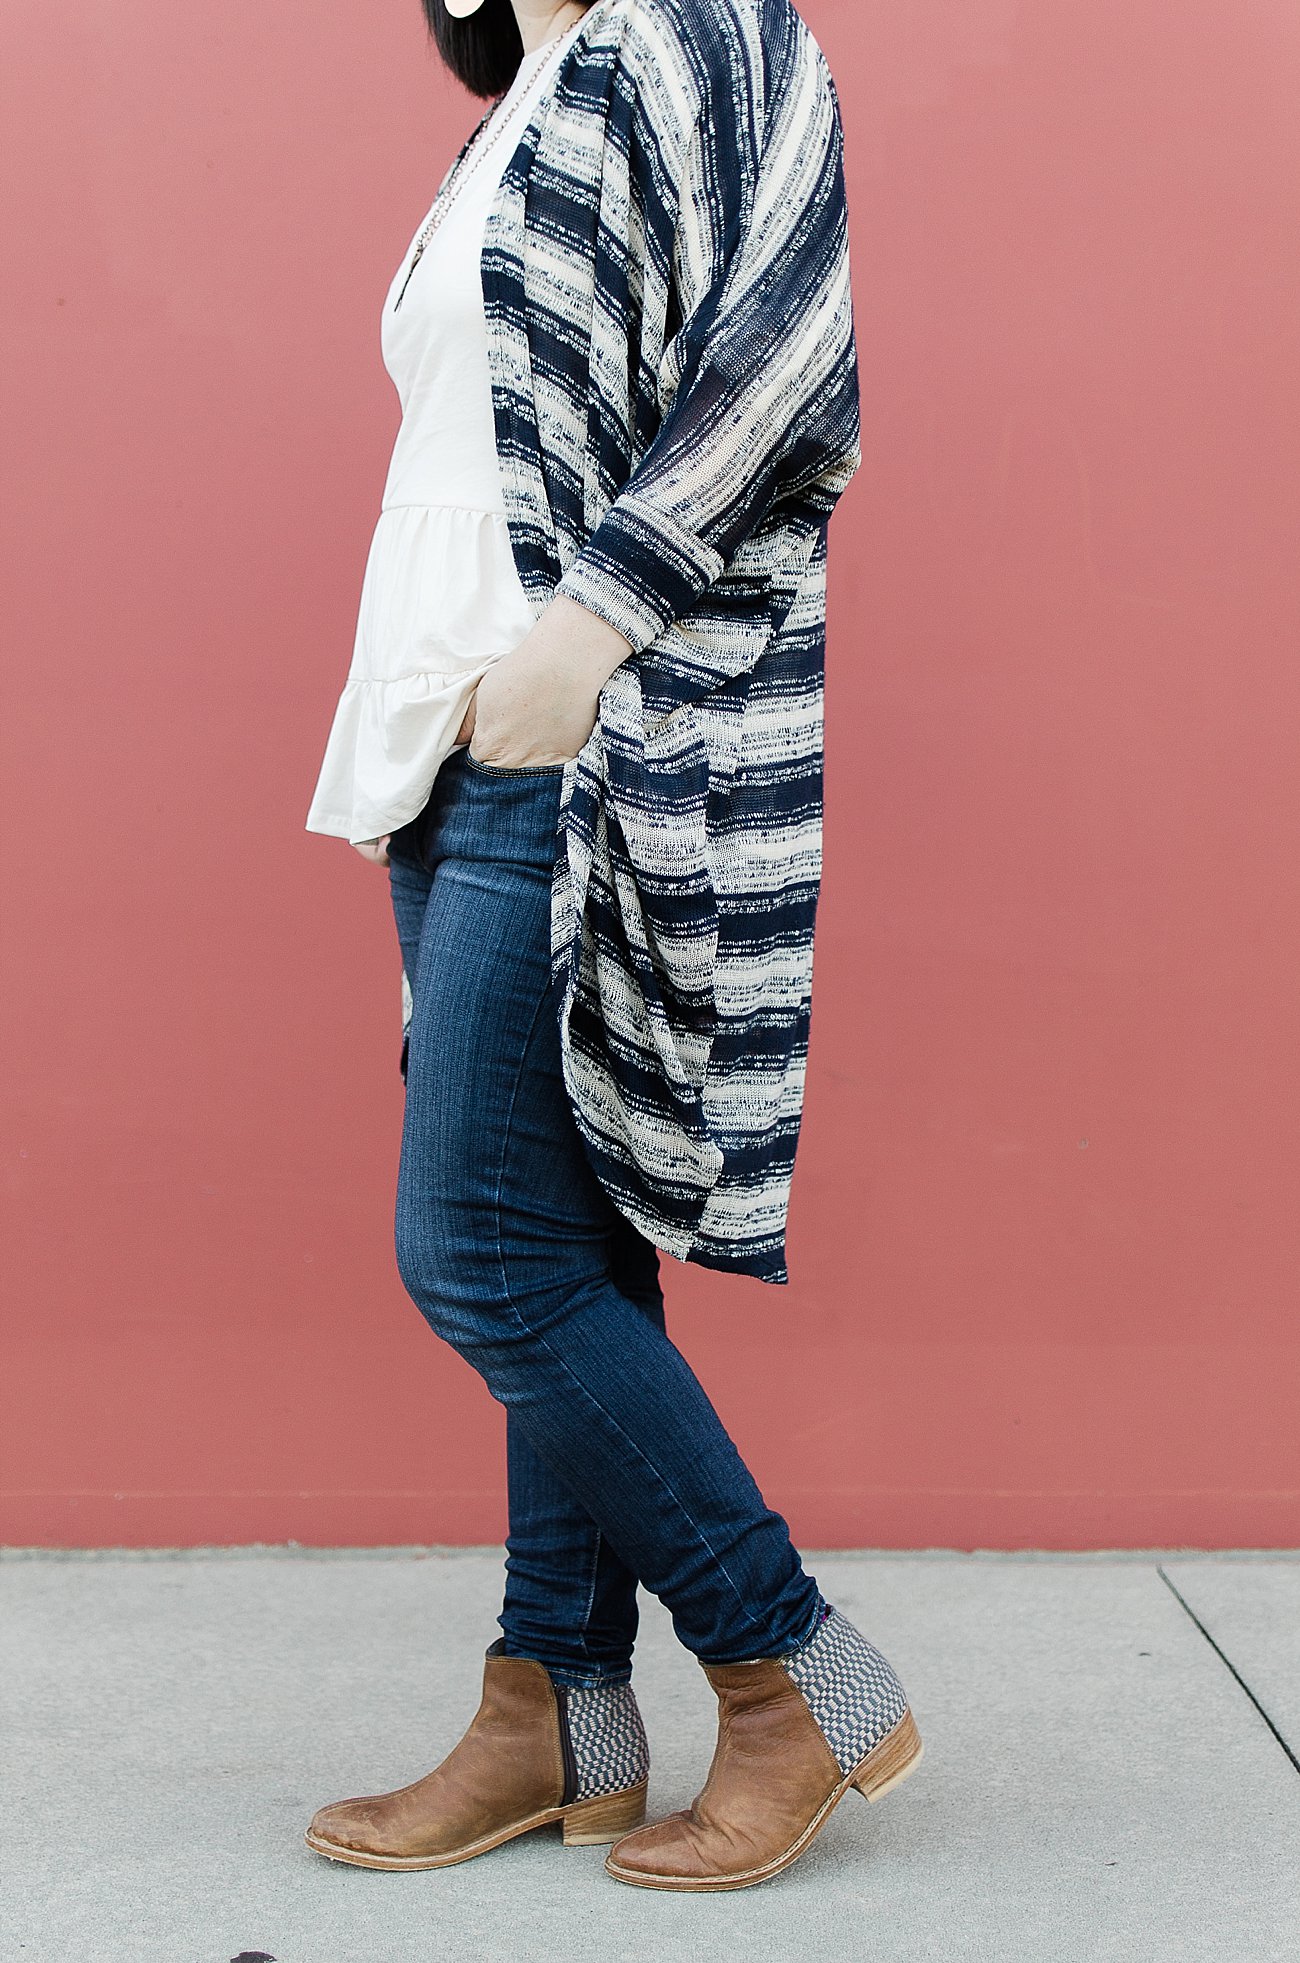 The Giving Keys, The Flourish Market, Elegantees, Paige Denim, The Root Collective booties | Ethical Fashion, fall style (3)